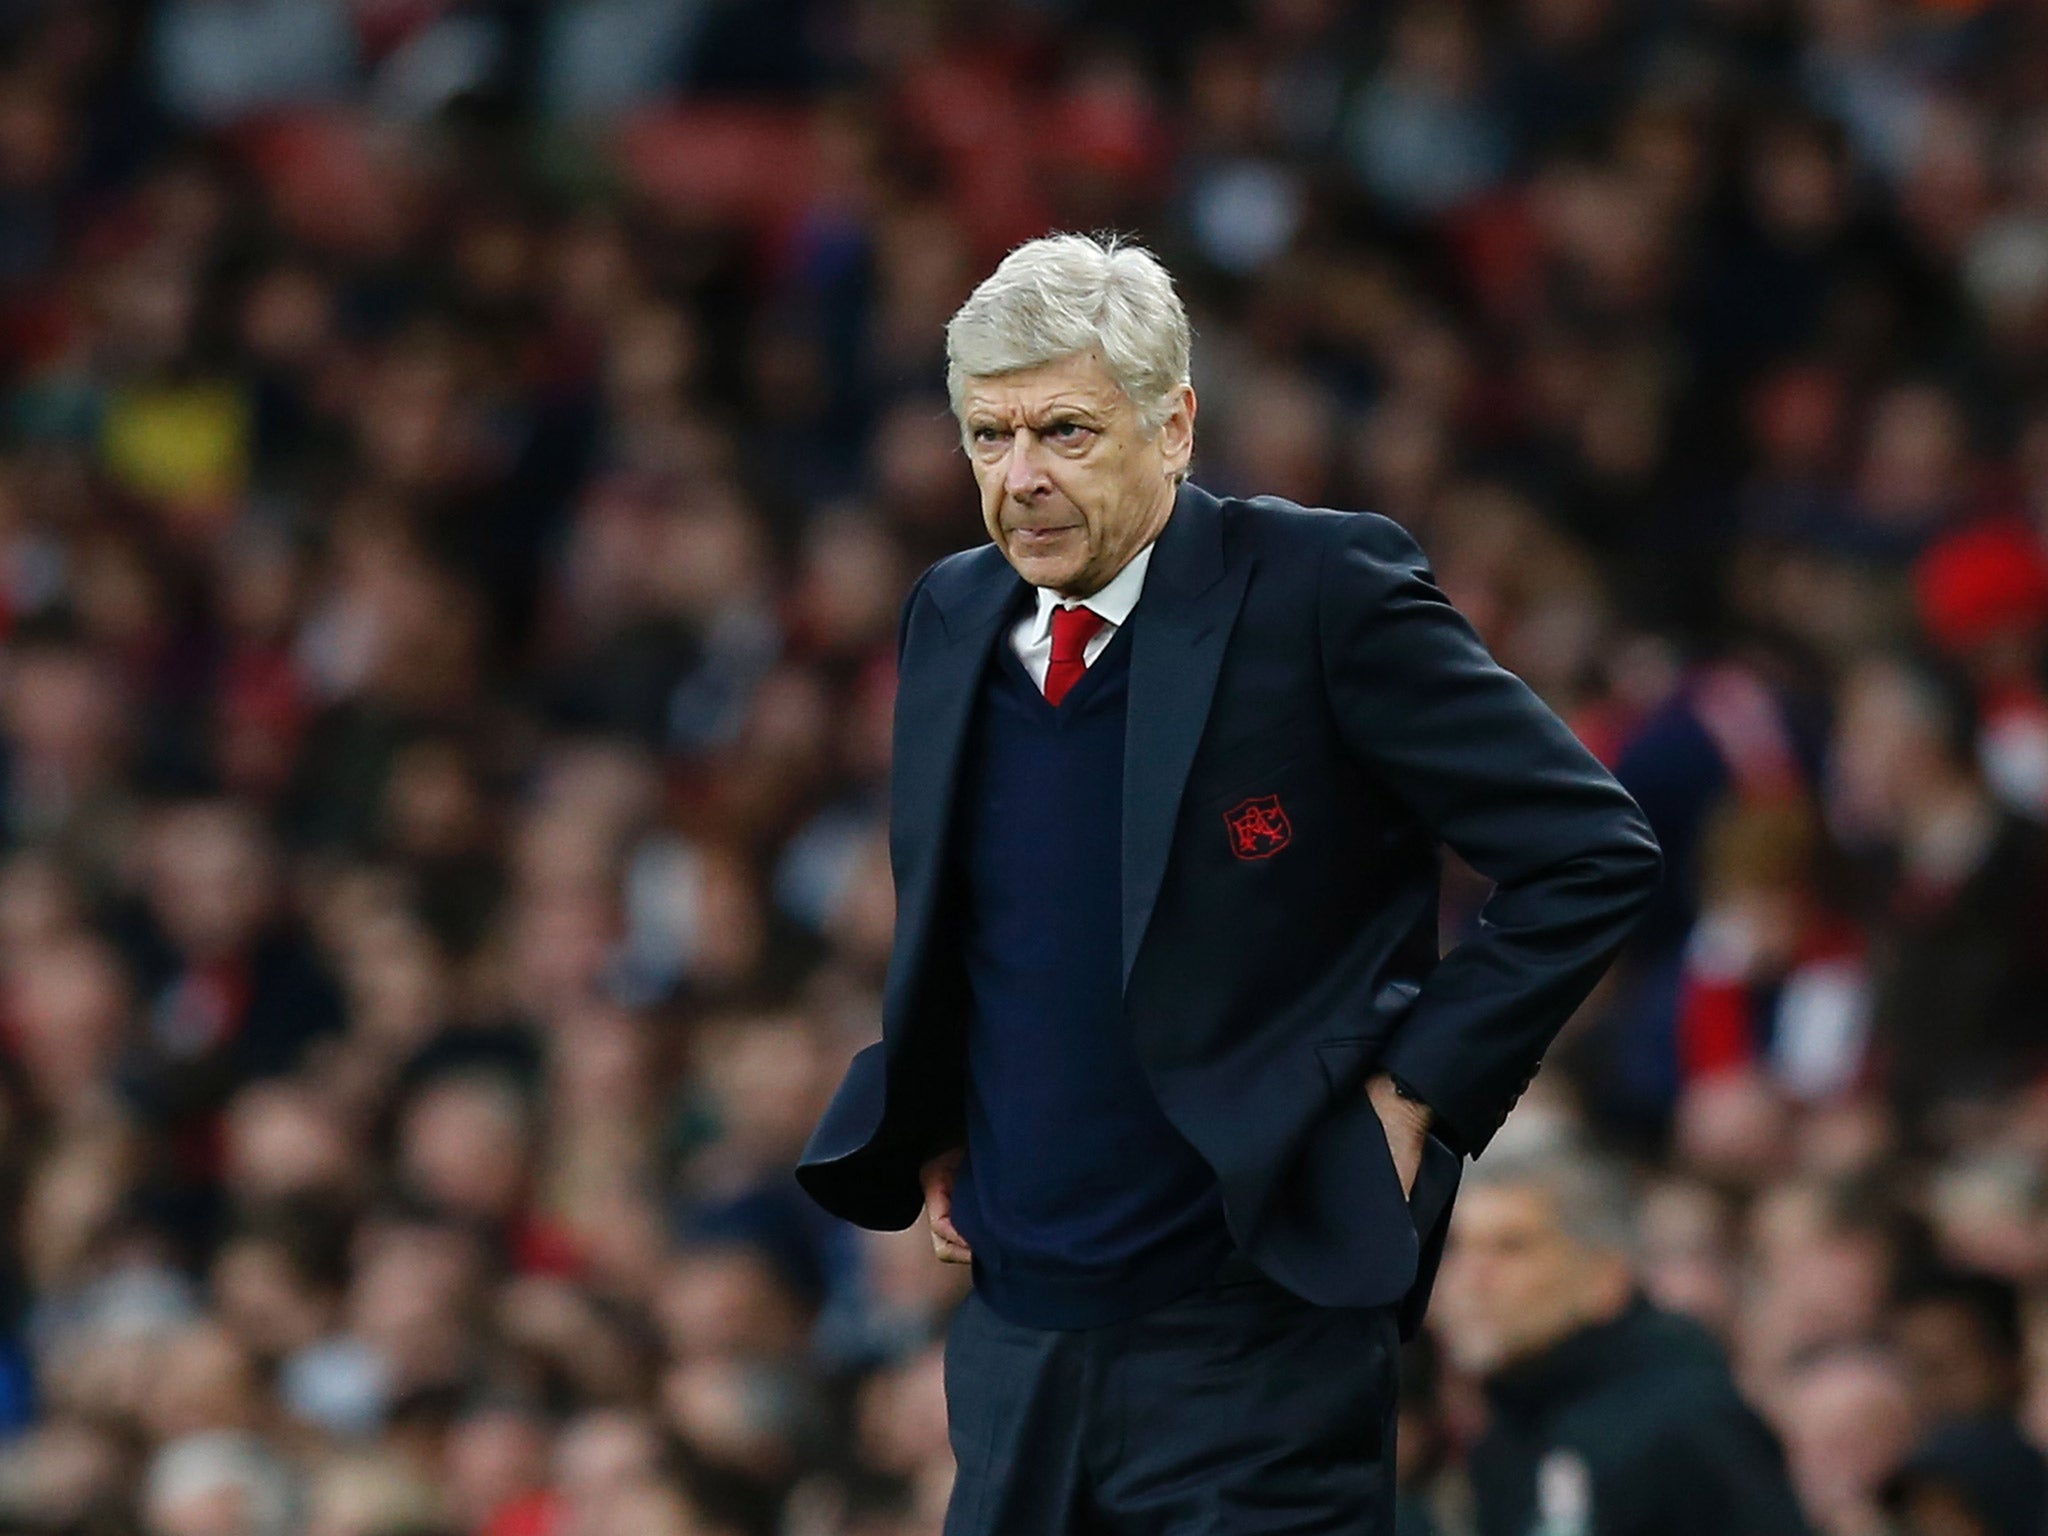 Arsene Wenger was left unhappy on his birthday as Arsenal were held to a 0-0 draw bu Middlesbrough